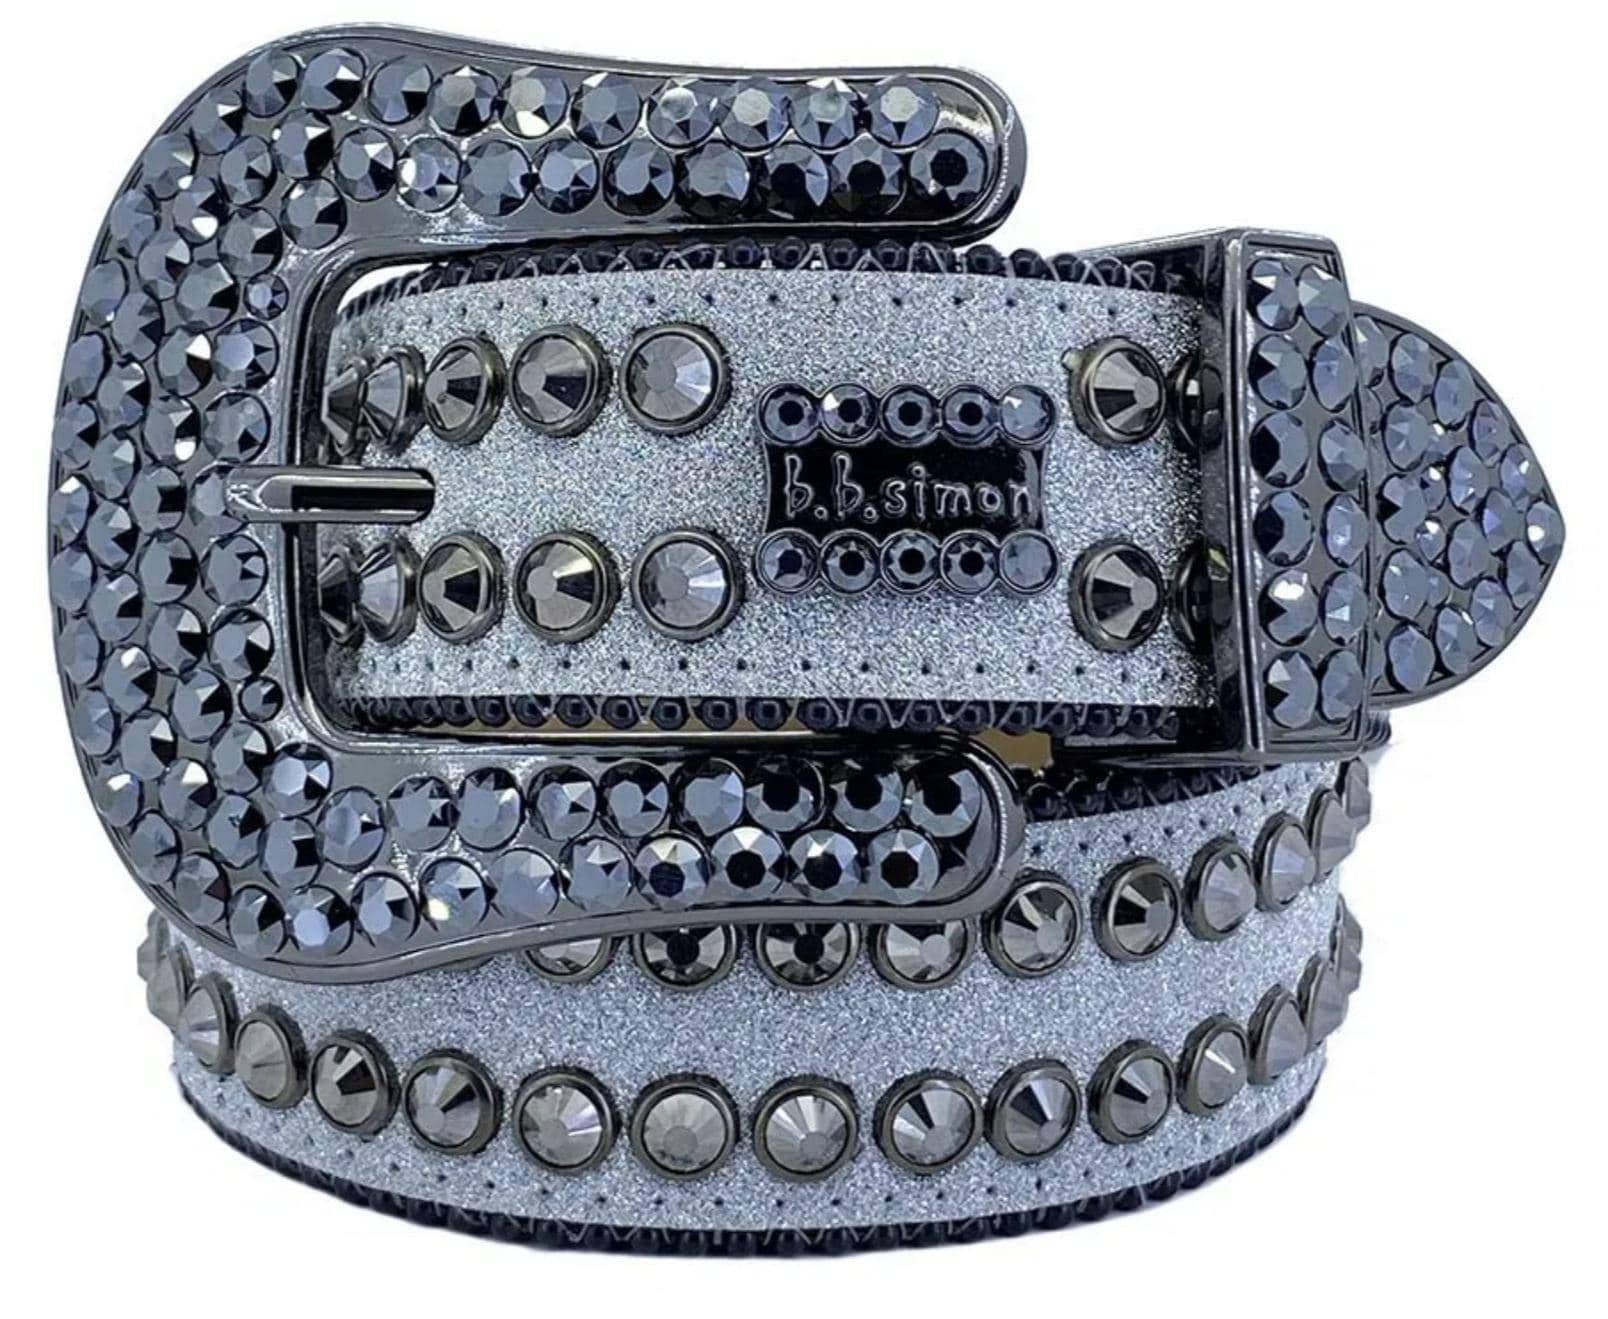 7072 K 9 - BB Simon Silver Leather with Crystals Belt - Amore Accessories